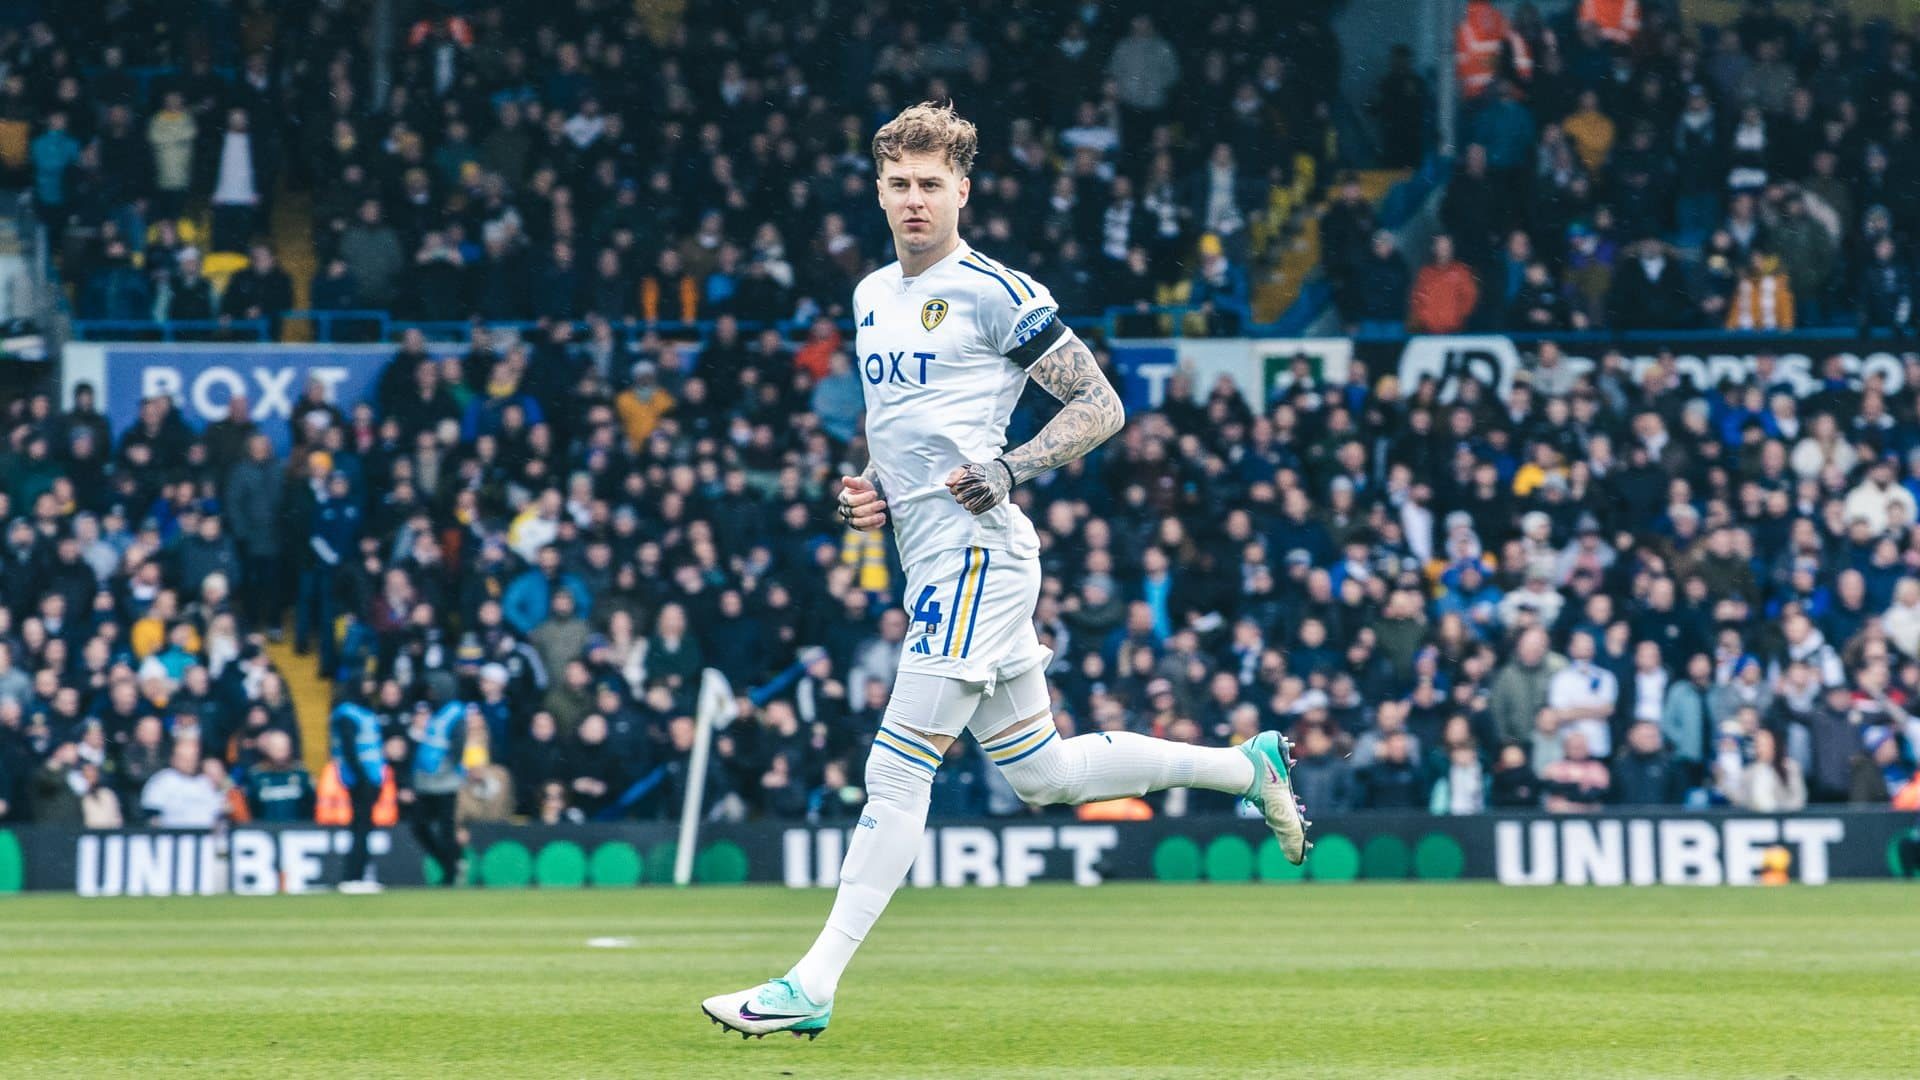 Leeds United 1-0 Norwich City: Back to back • The Square Ball